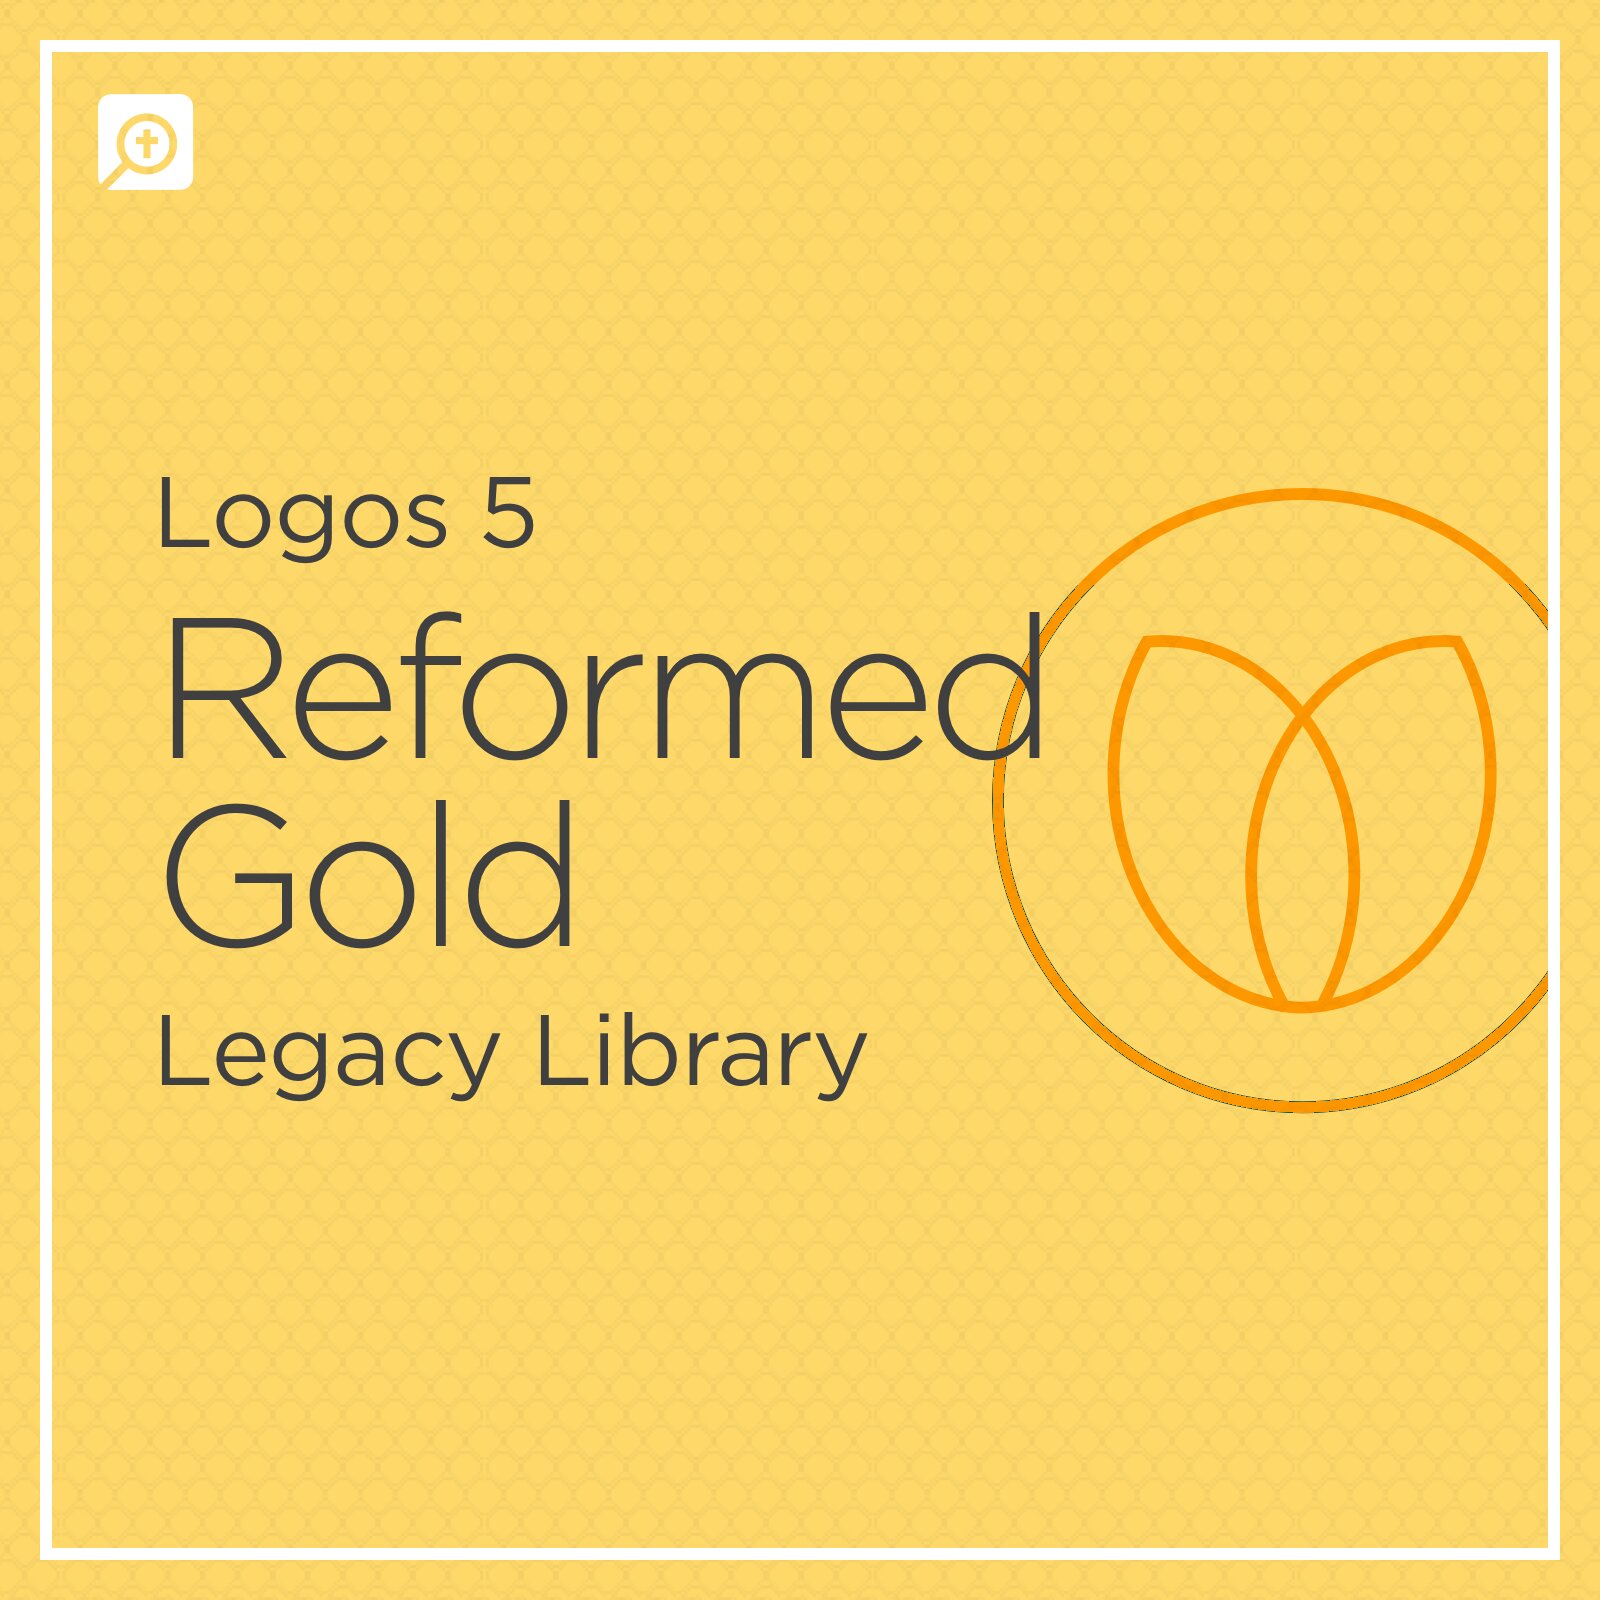 Logos 5 Reformed Gold Legacy Library